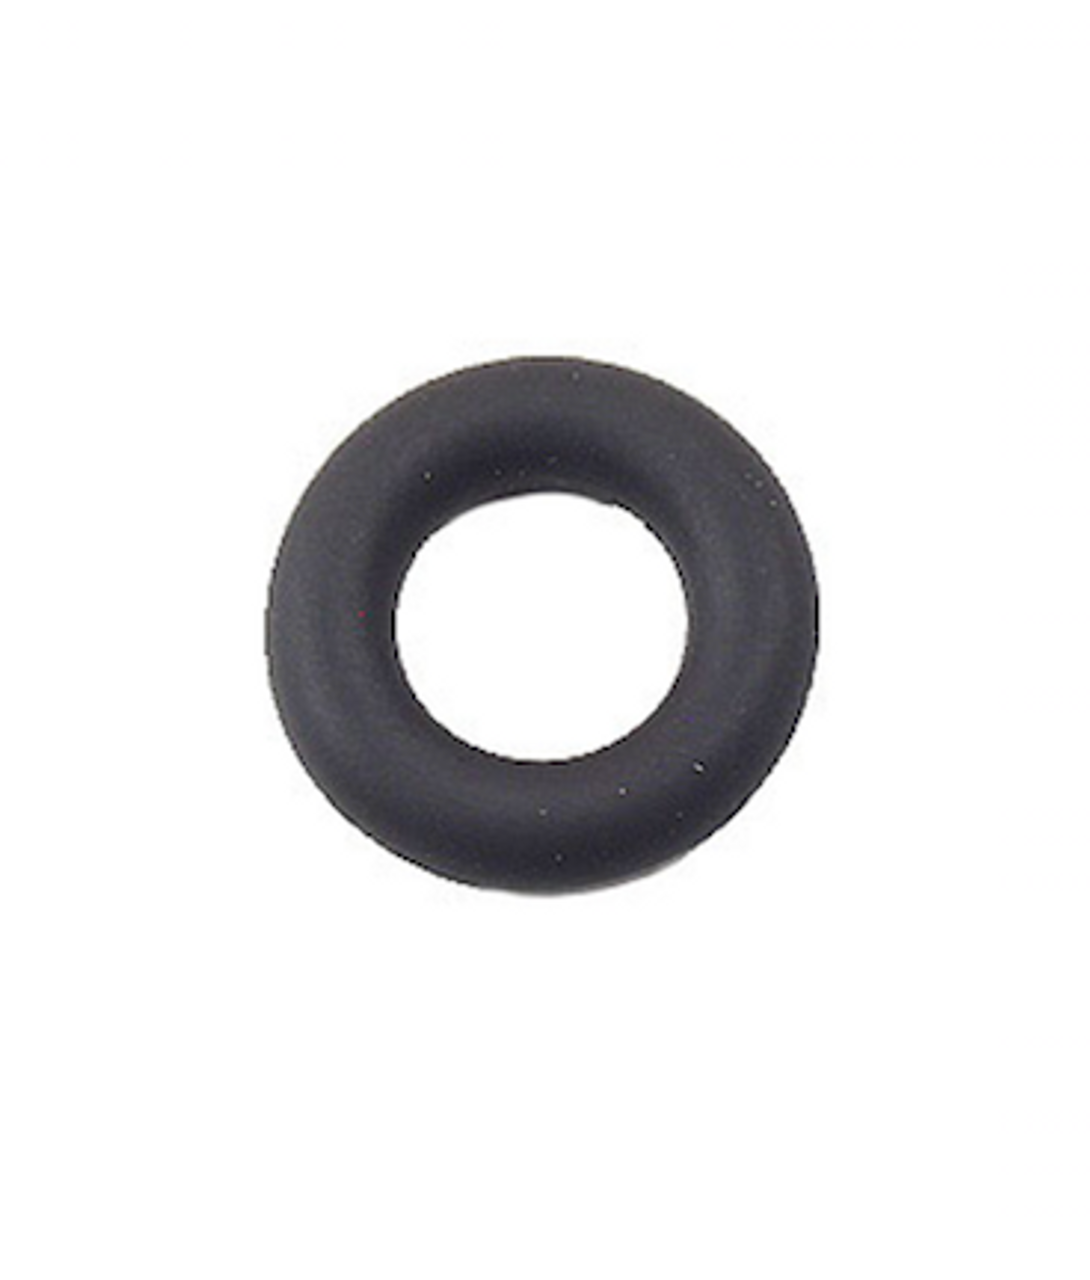 BMW Mini Fuel Injector O-Ring - Elring 893889